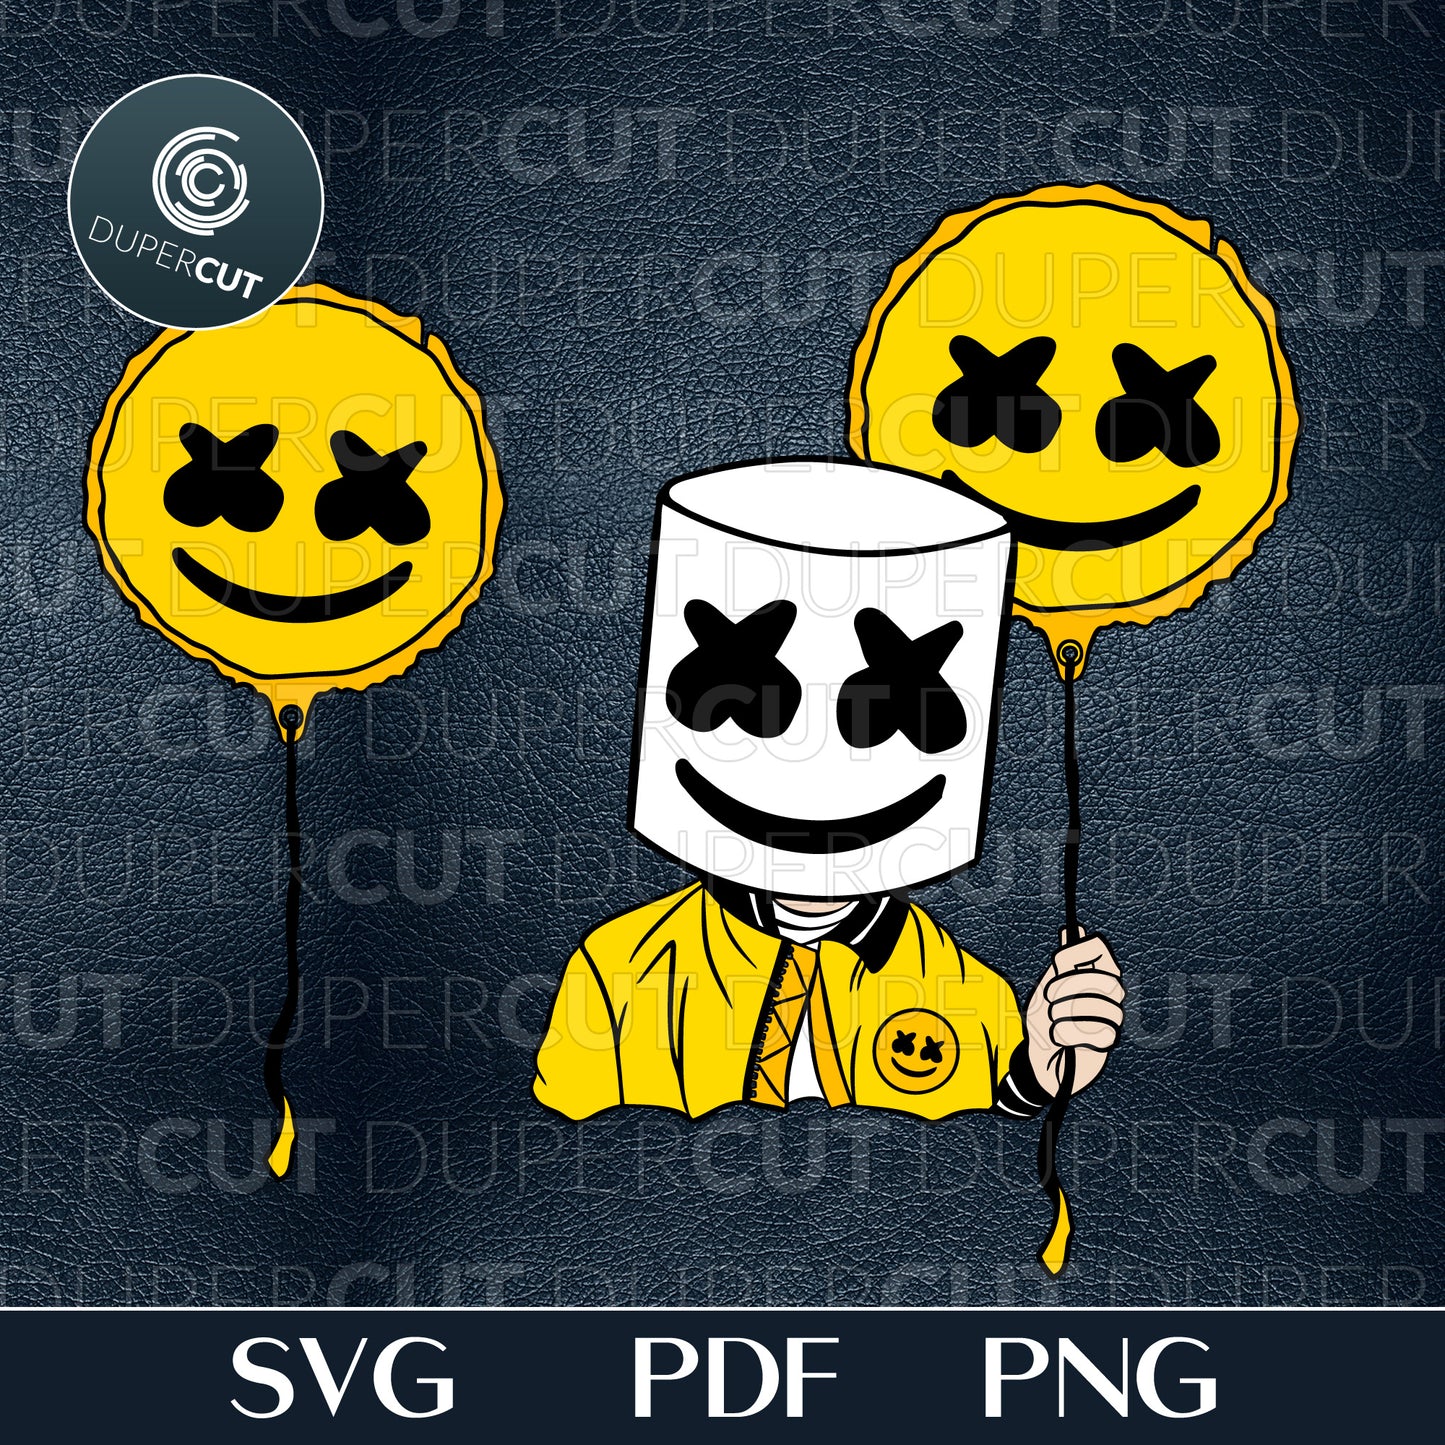 Marshmello DJ with Happier balloon, Illustration, fan art custom design. Printable SVG PNG files. For Birthday party, crafting, print and cut.